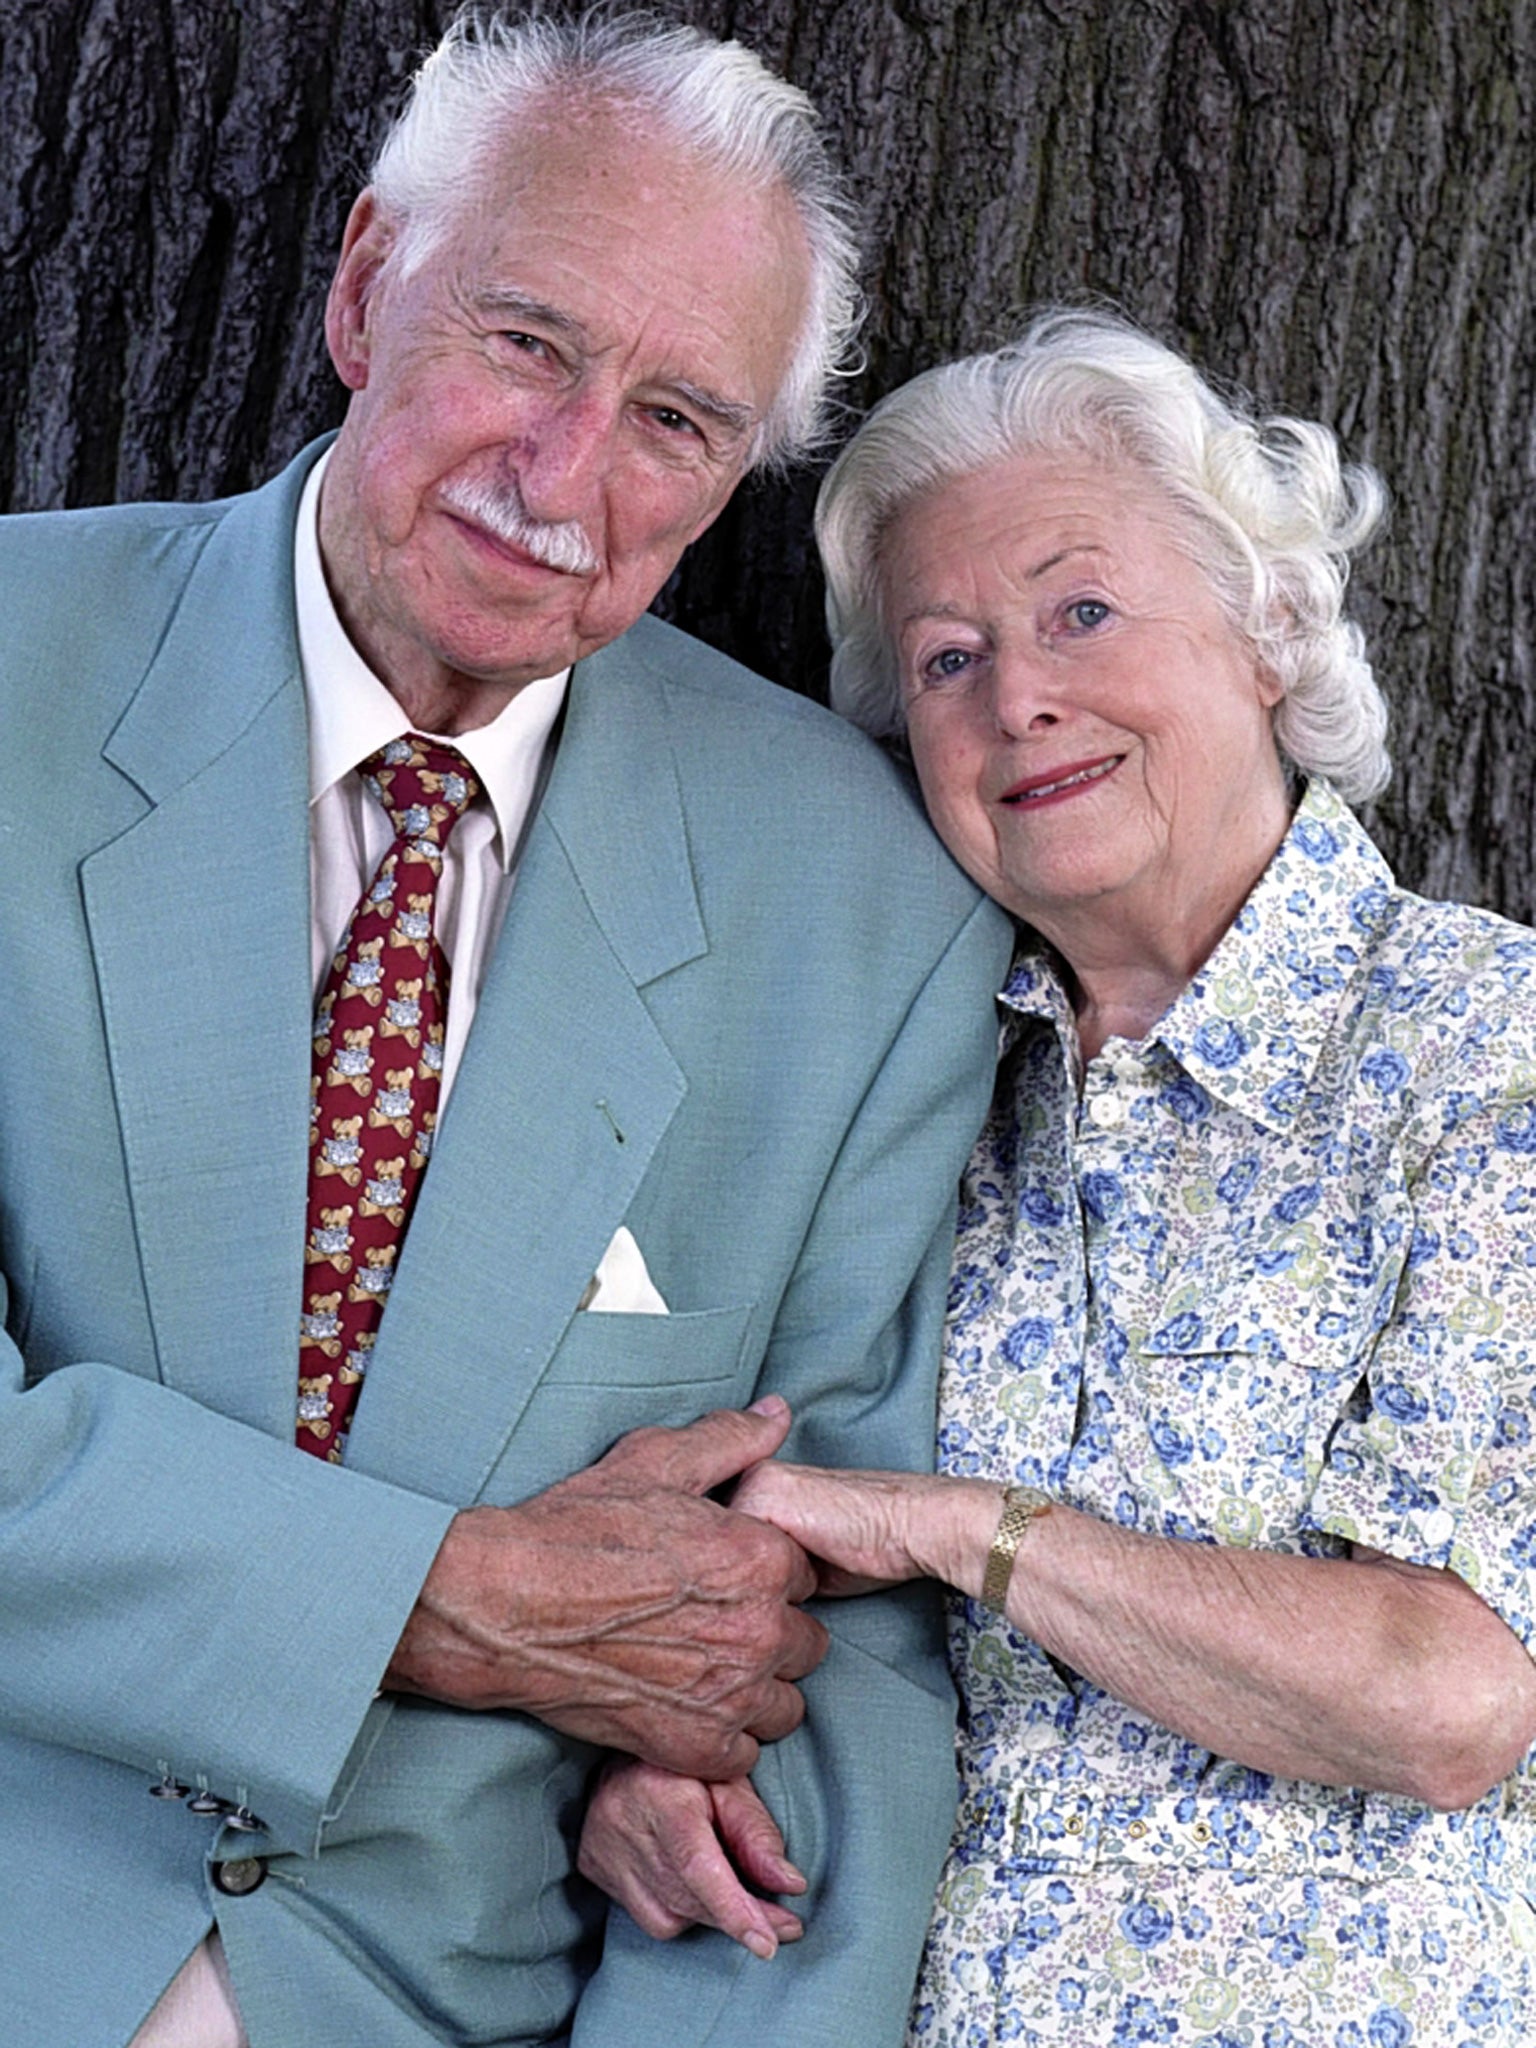 Peters with June Spencer, his wife Peggy in 'The Archers'